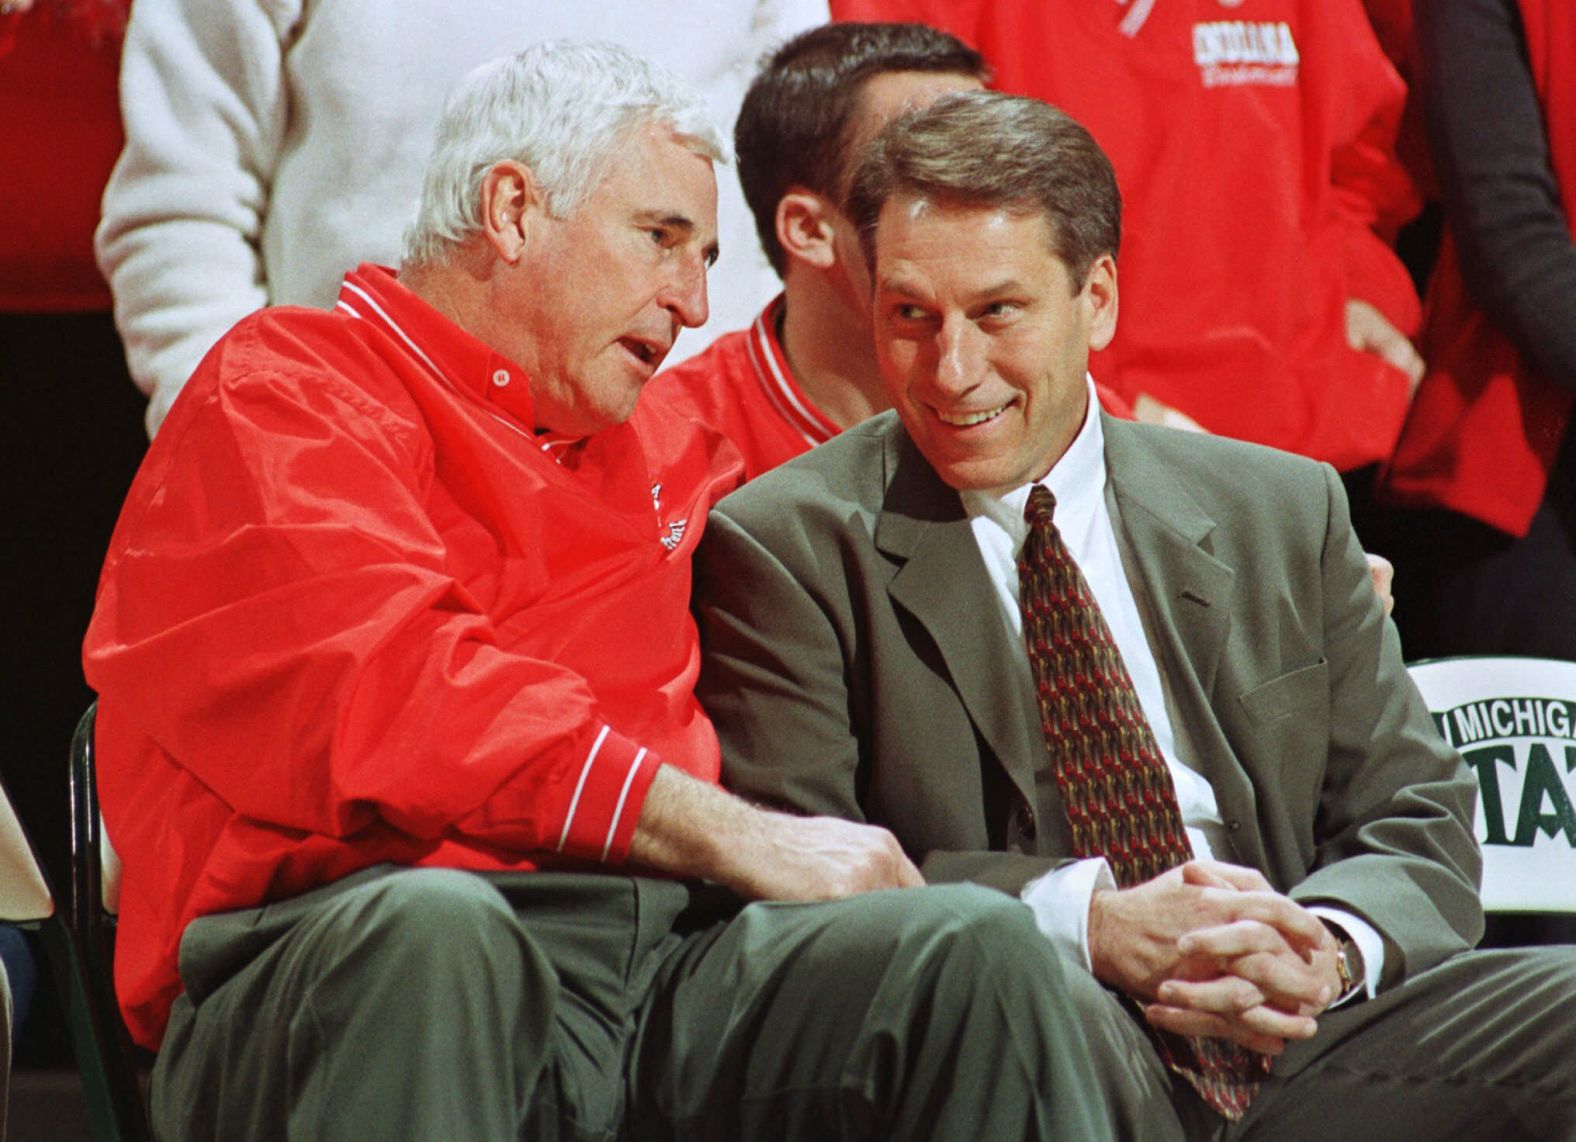 Knight and Michigan State coach Tom Izzo talk before a game in 2000.